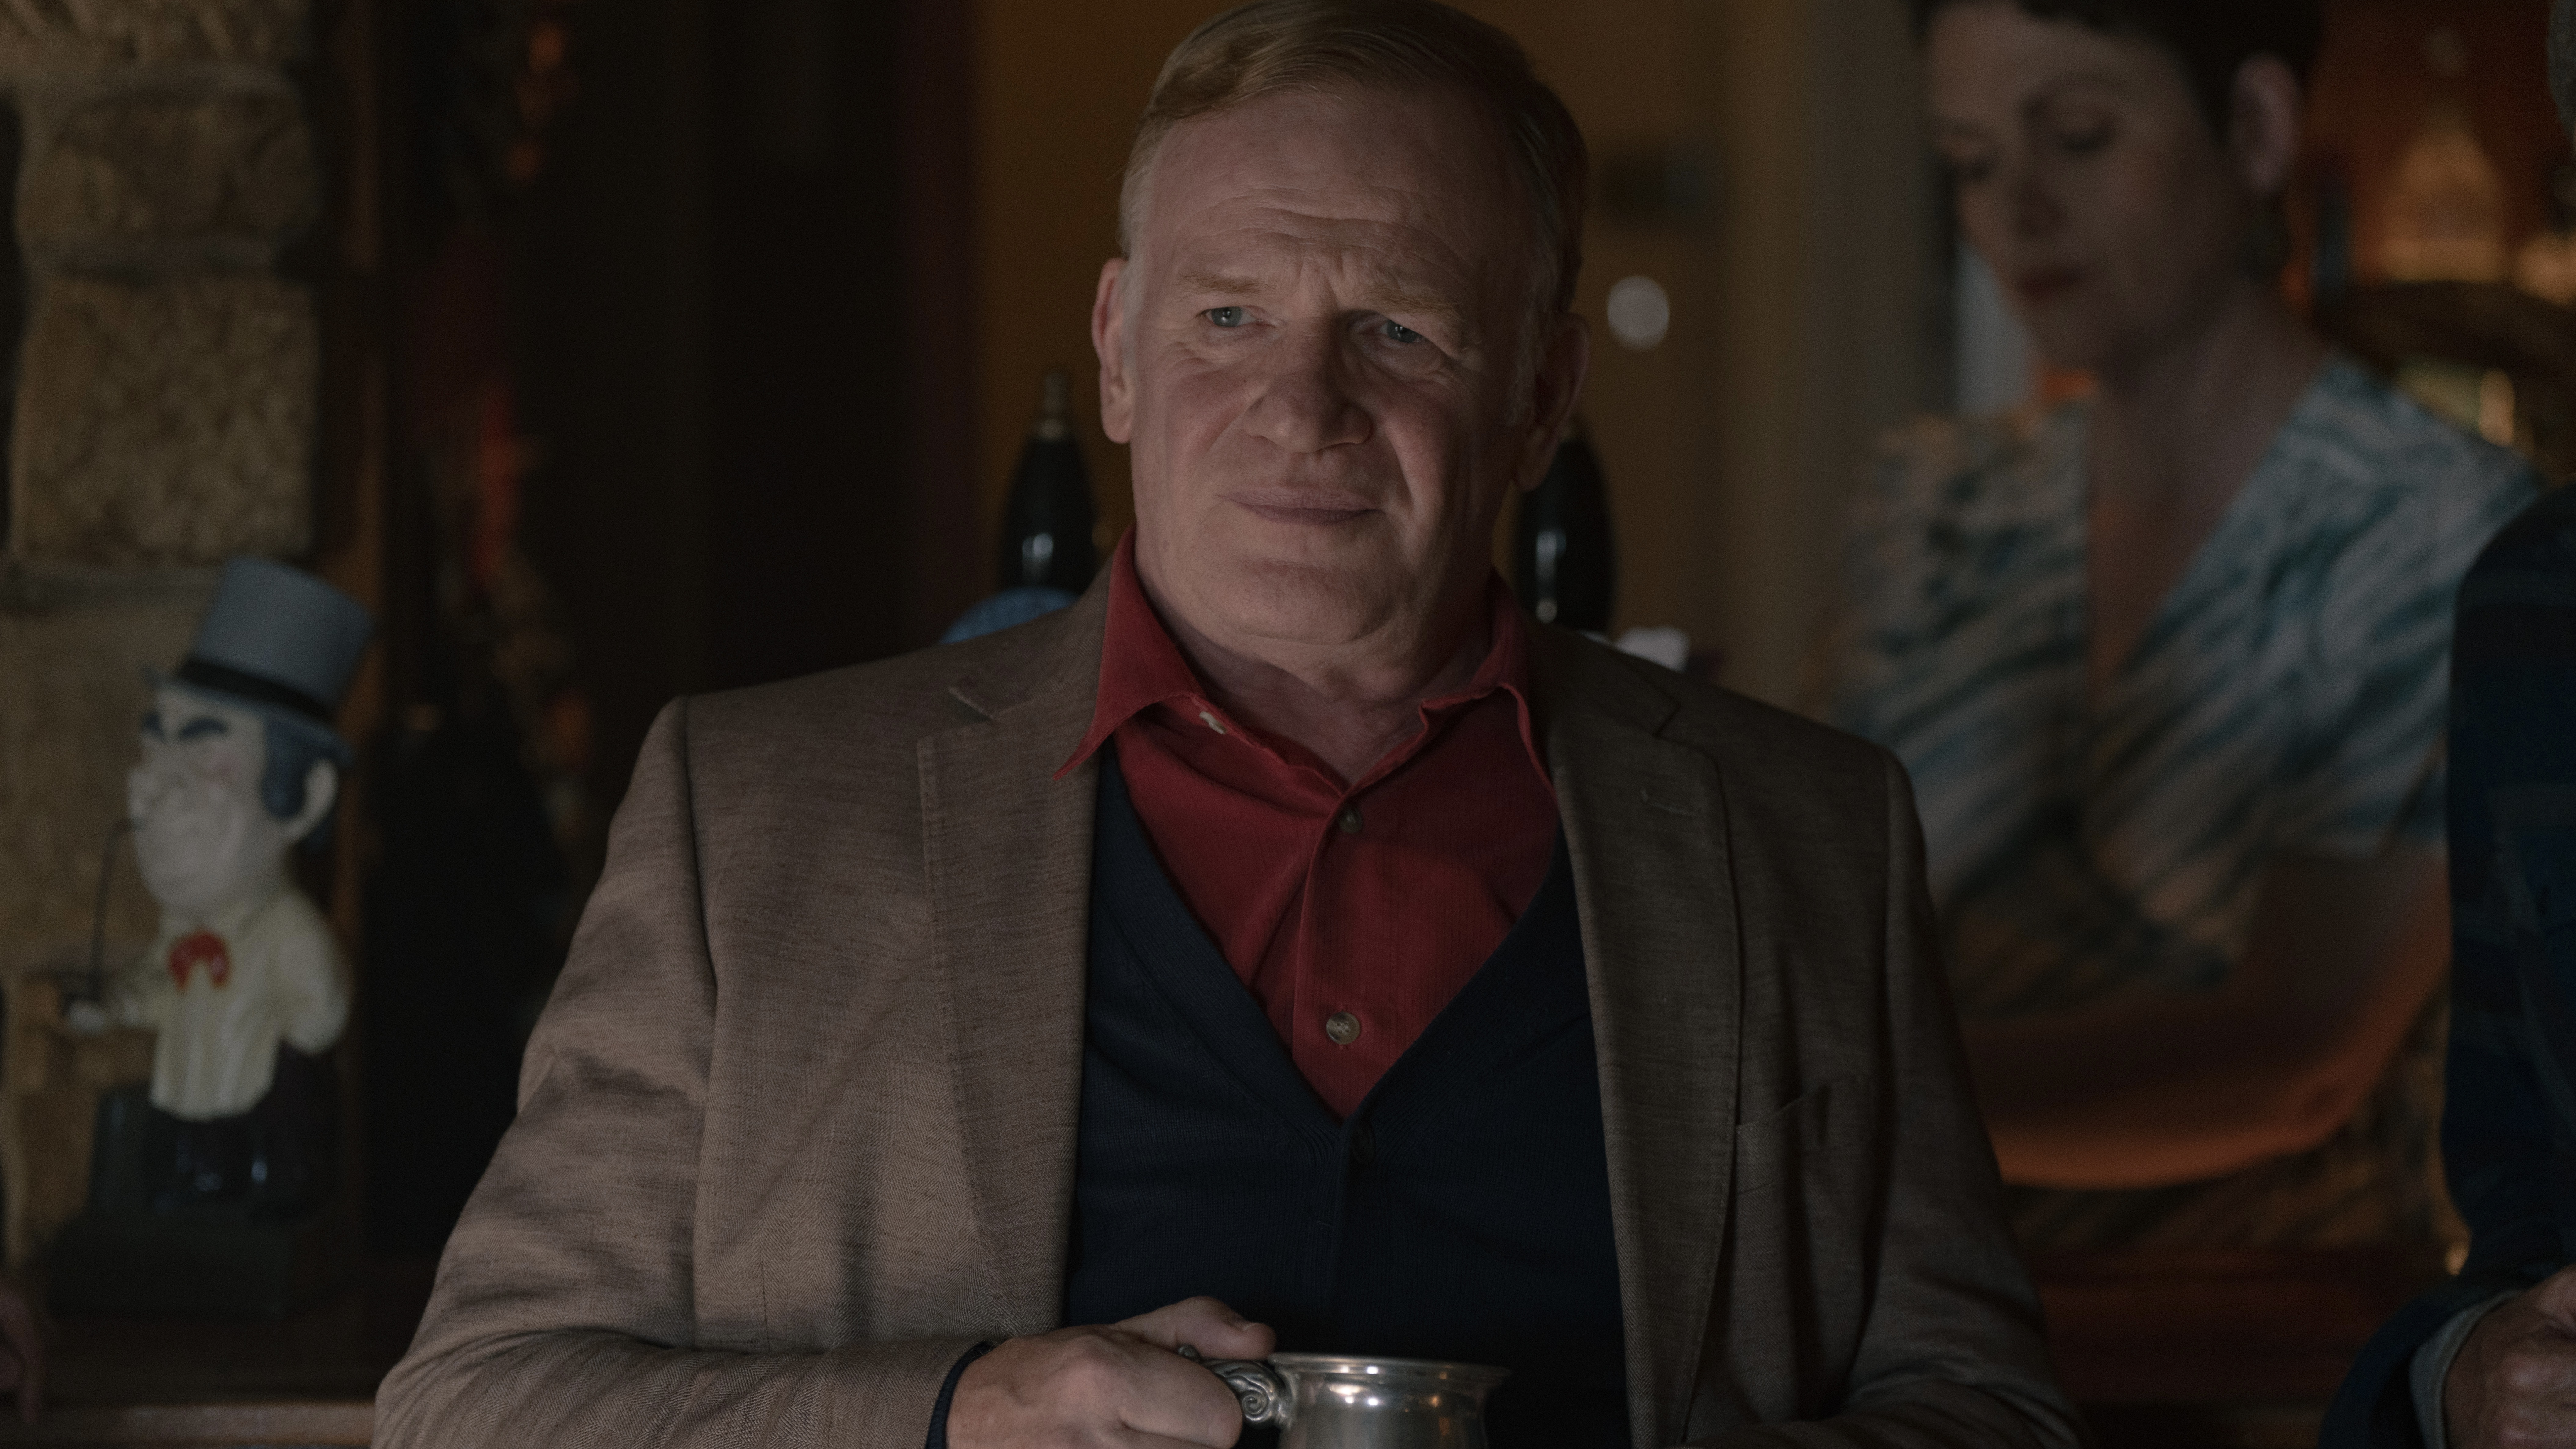 Mark Lewis Jones in a brown jacket and red shirt holds a tankard as Gruffudd Prosser in The Red King.